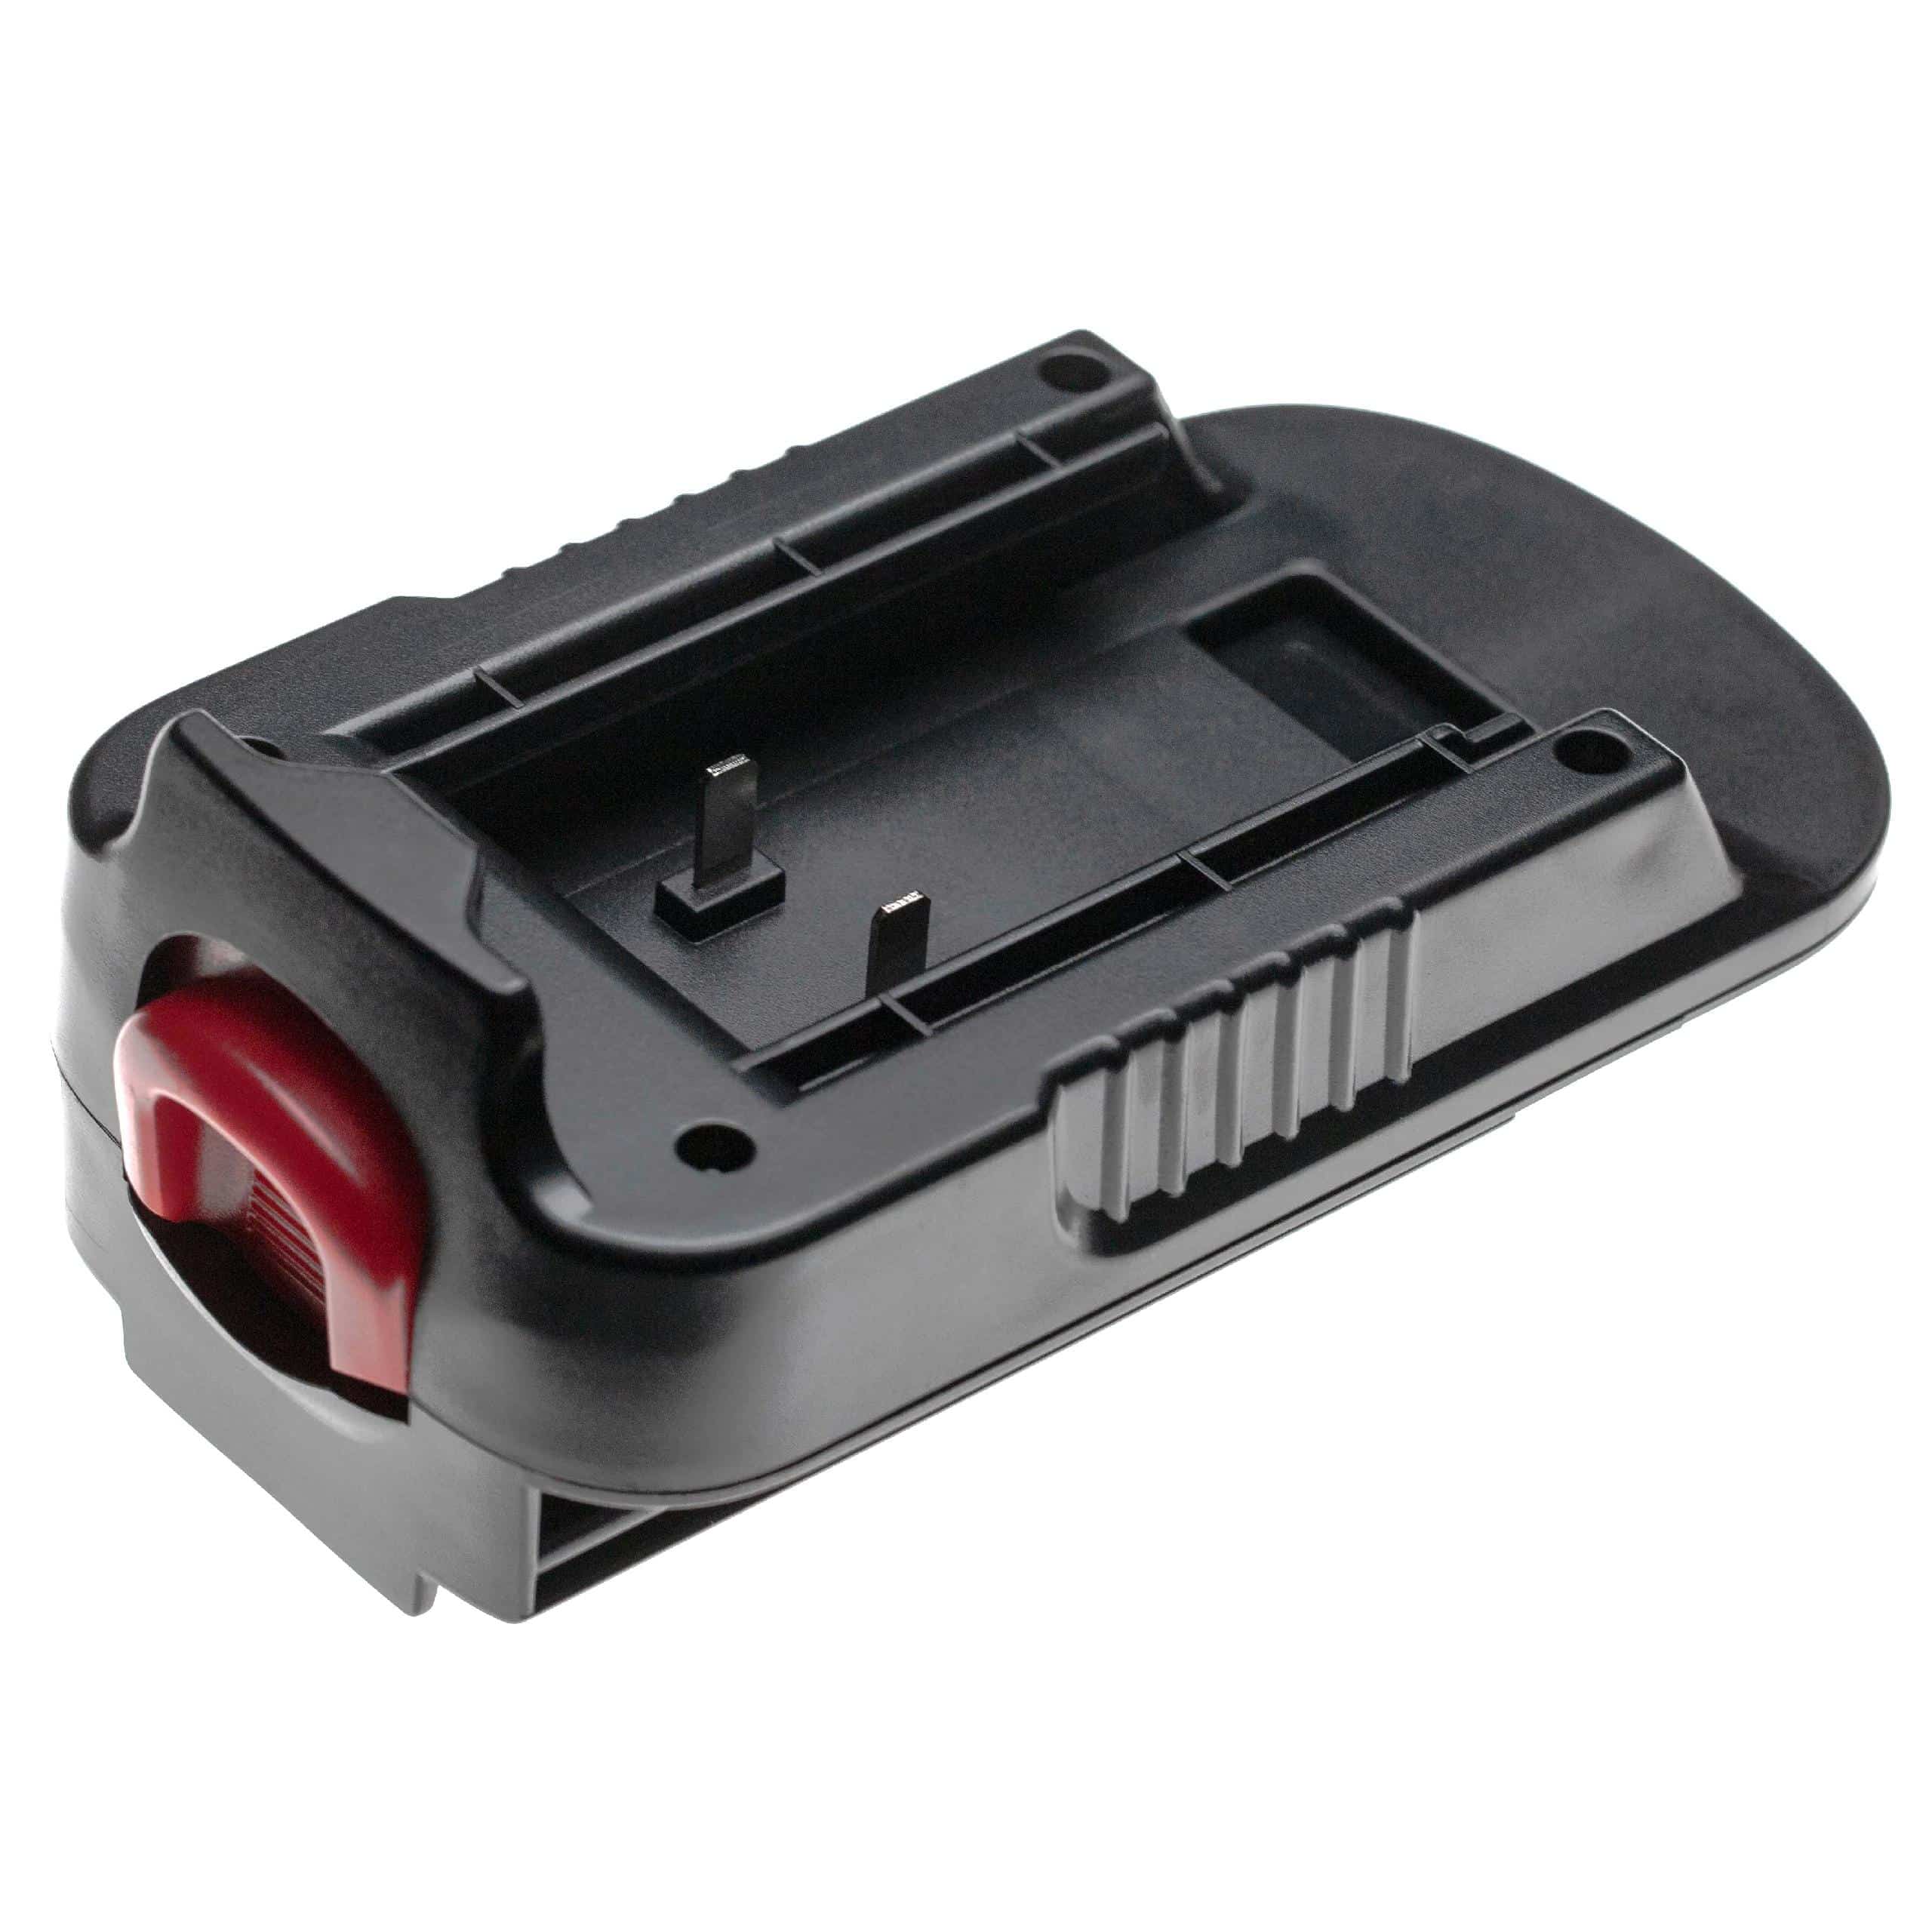 Battery Adapter suitable for Black & Decker Tool - 20 V Li-Ion to 18 V Ni-MH